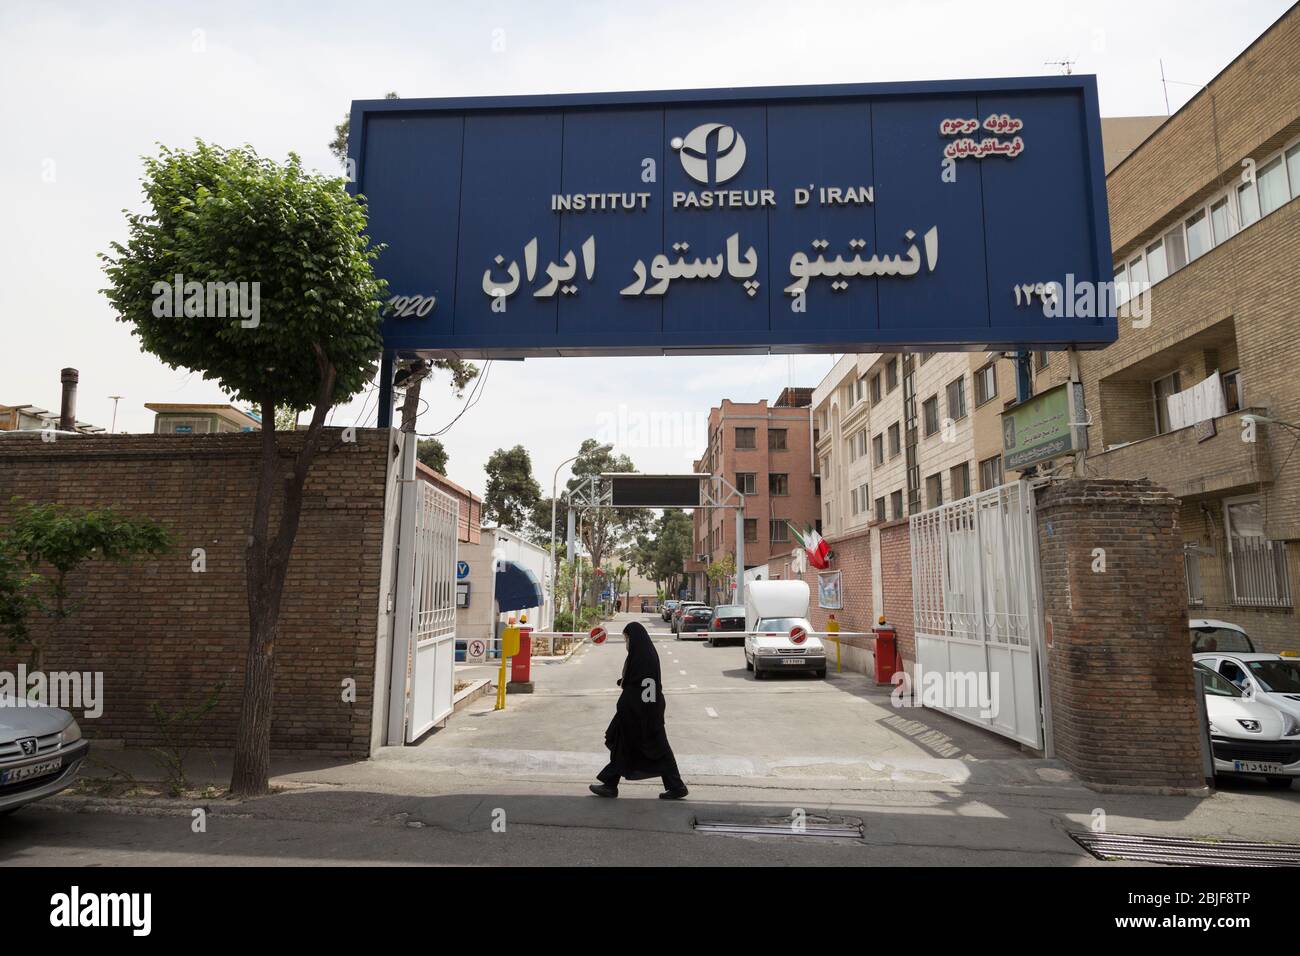 April 29, 2020, Tehran, Iran: A view of the entrance of Pasteur Institute of Iran after a media tour to the key organization fighting infectious diseases within Iran, which was founded in the 1920s in downtown Tehran, Iran. At the century-old Pasteur Institute of Iran, the frontline of the country's fight against the coronavirus outbreak, officials say 15,000 coronavirus tests are being carried out daily. The Pasteur Institute is the leader of the country's 120 laboratories tasked with diagnosing COVID-19 in samples taken from patients across the country and that have confirmed 93,657 cases si Stock Photo